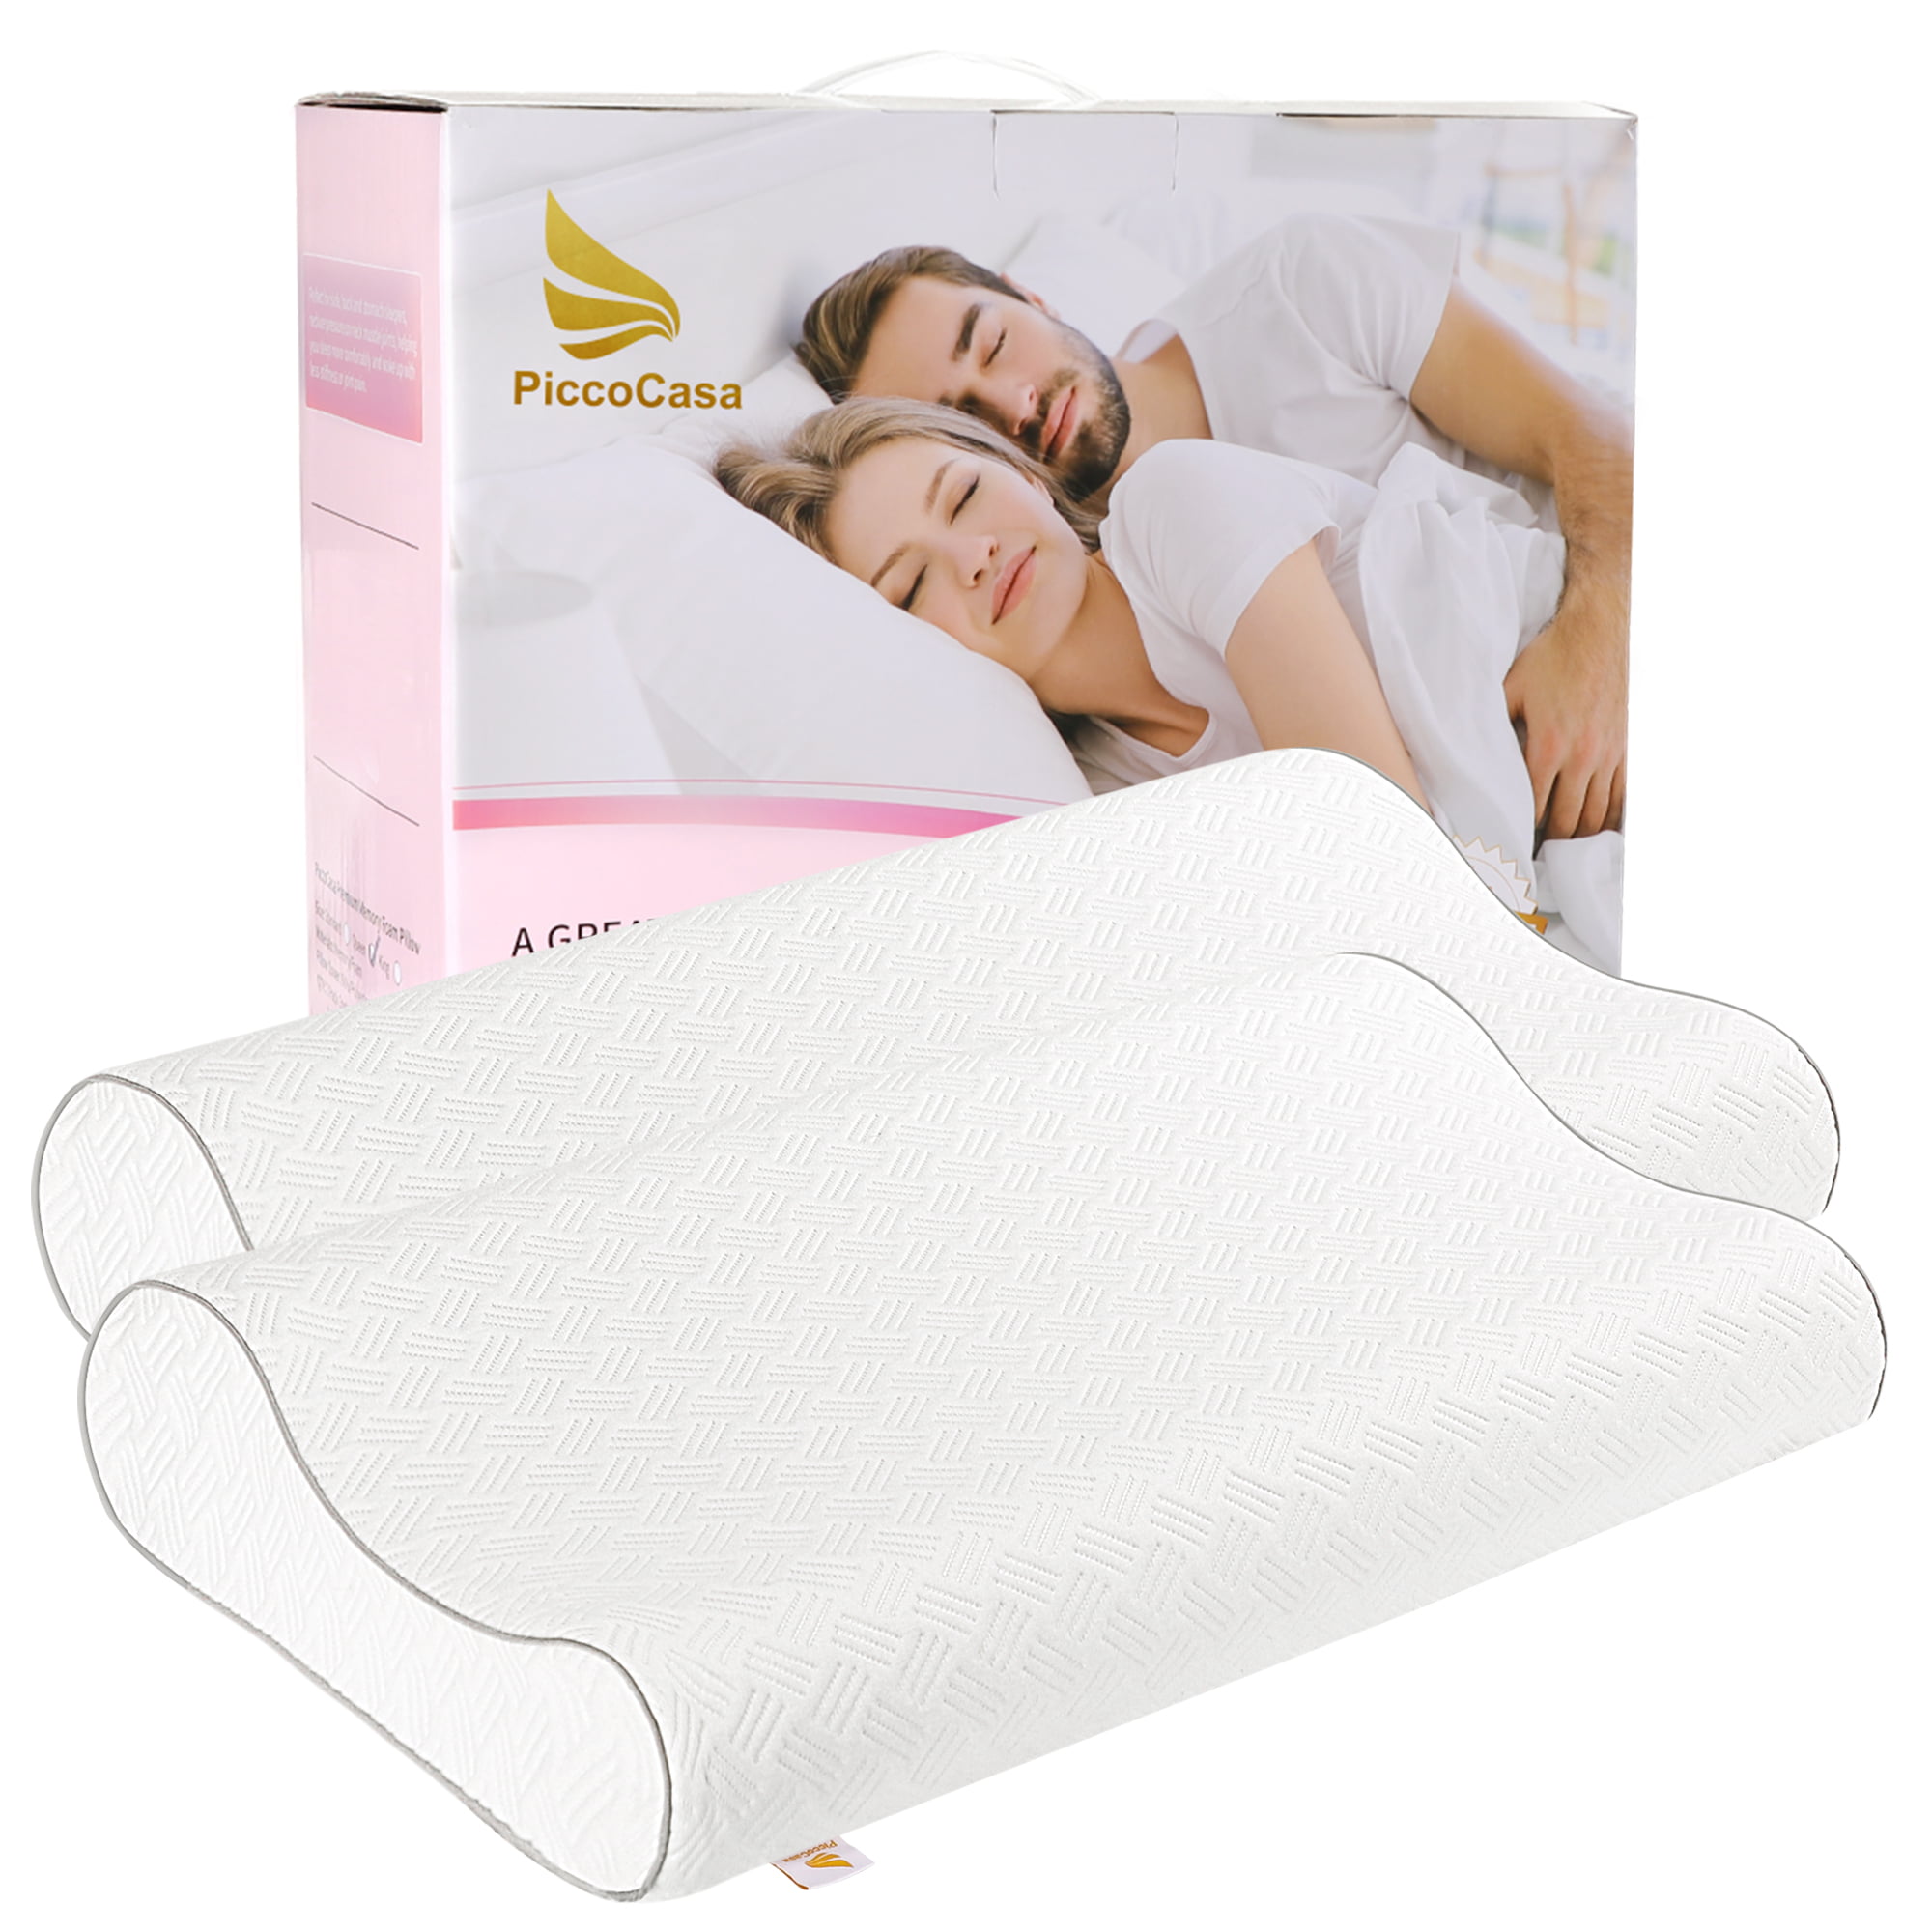 2PCS Memory Foam Bed Pillow Contour Orthopaedic Firm Neck Support Cover New 